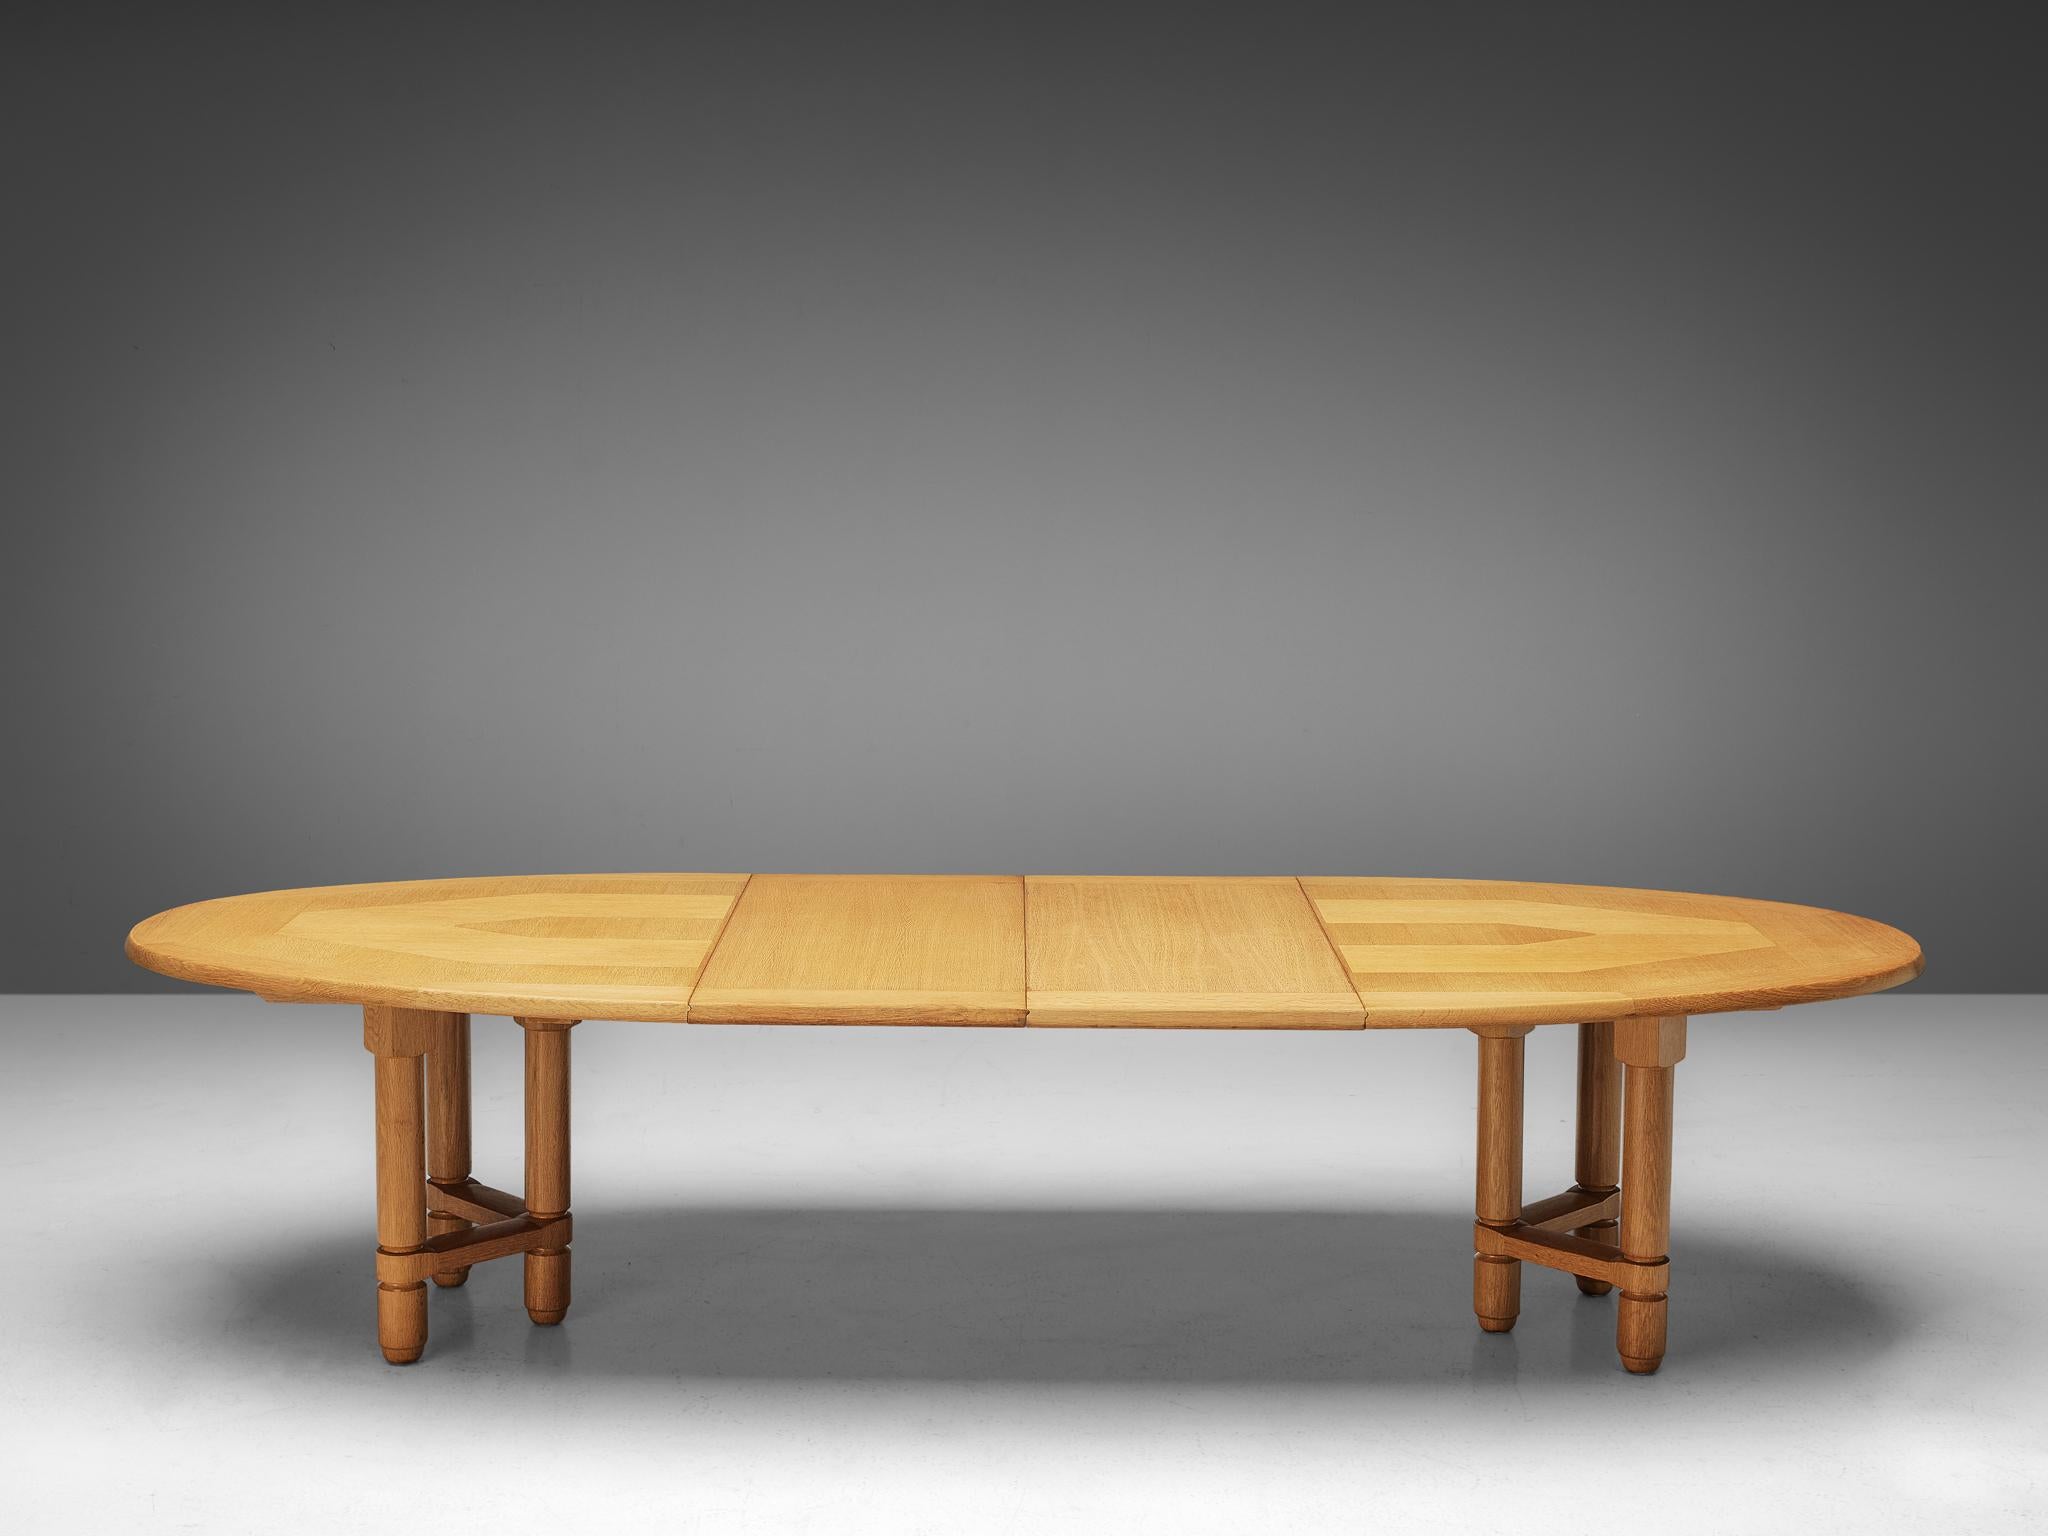 Guillerme et Chambron, extendable dining table, oak, 1960s.

Round shaped dining table with inlayed top. This extendable table in solid oak comes with two optional leaves, which makes it a very versatile item. The sculptural six legged base has